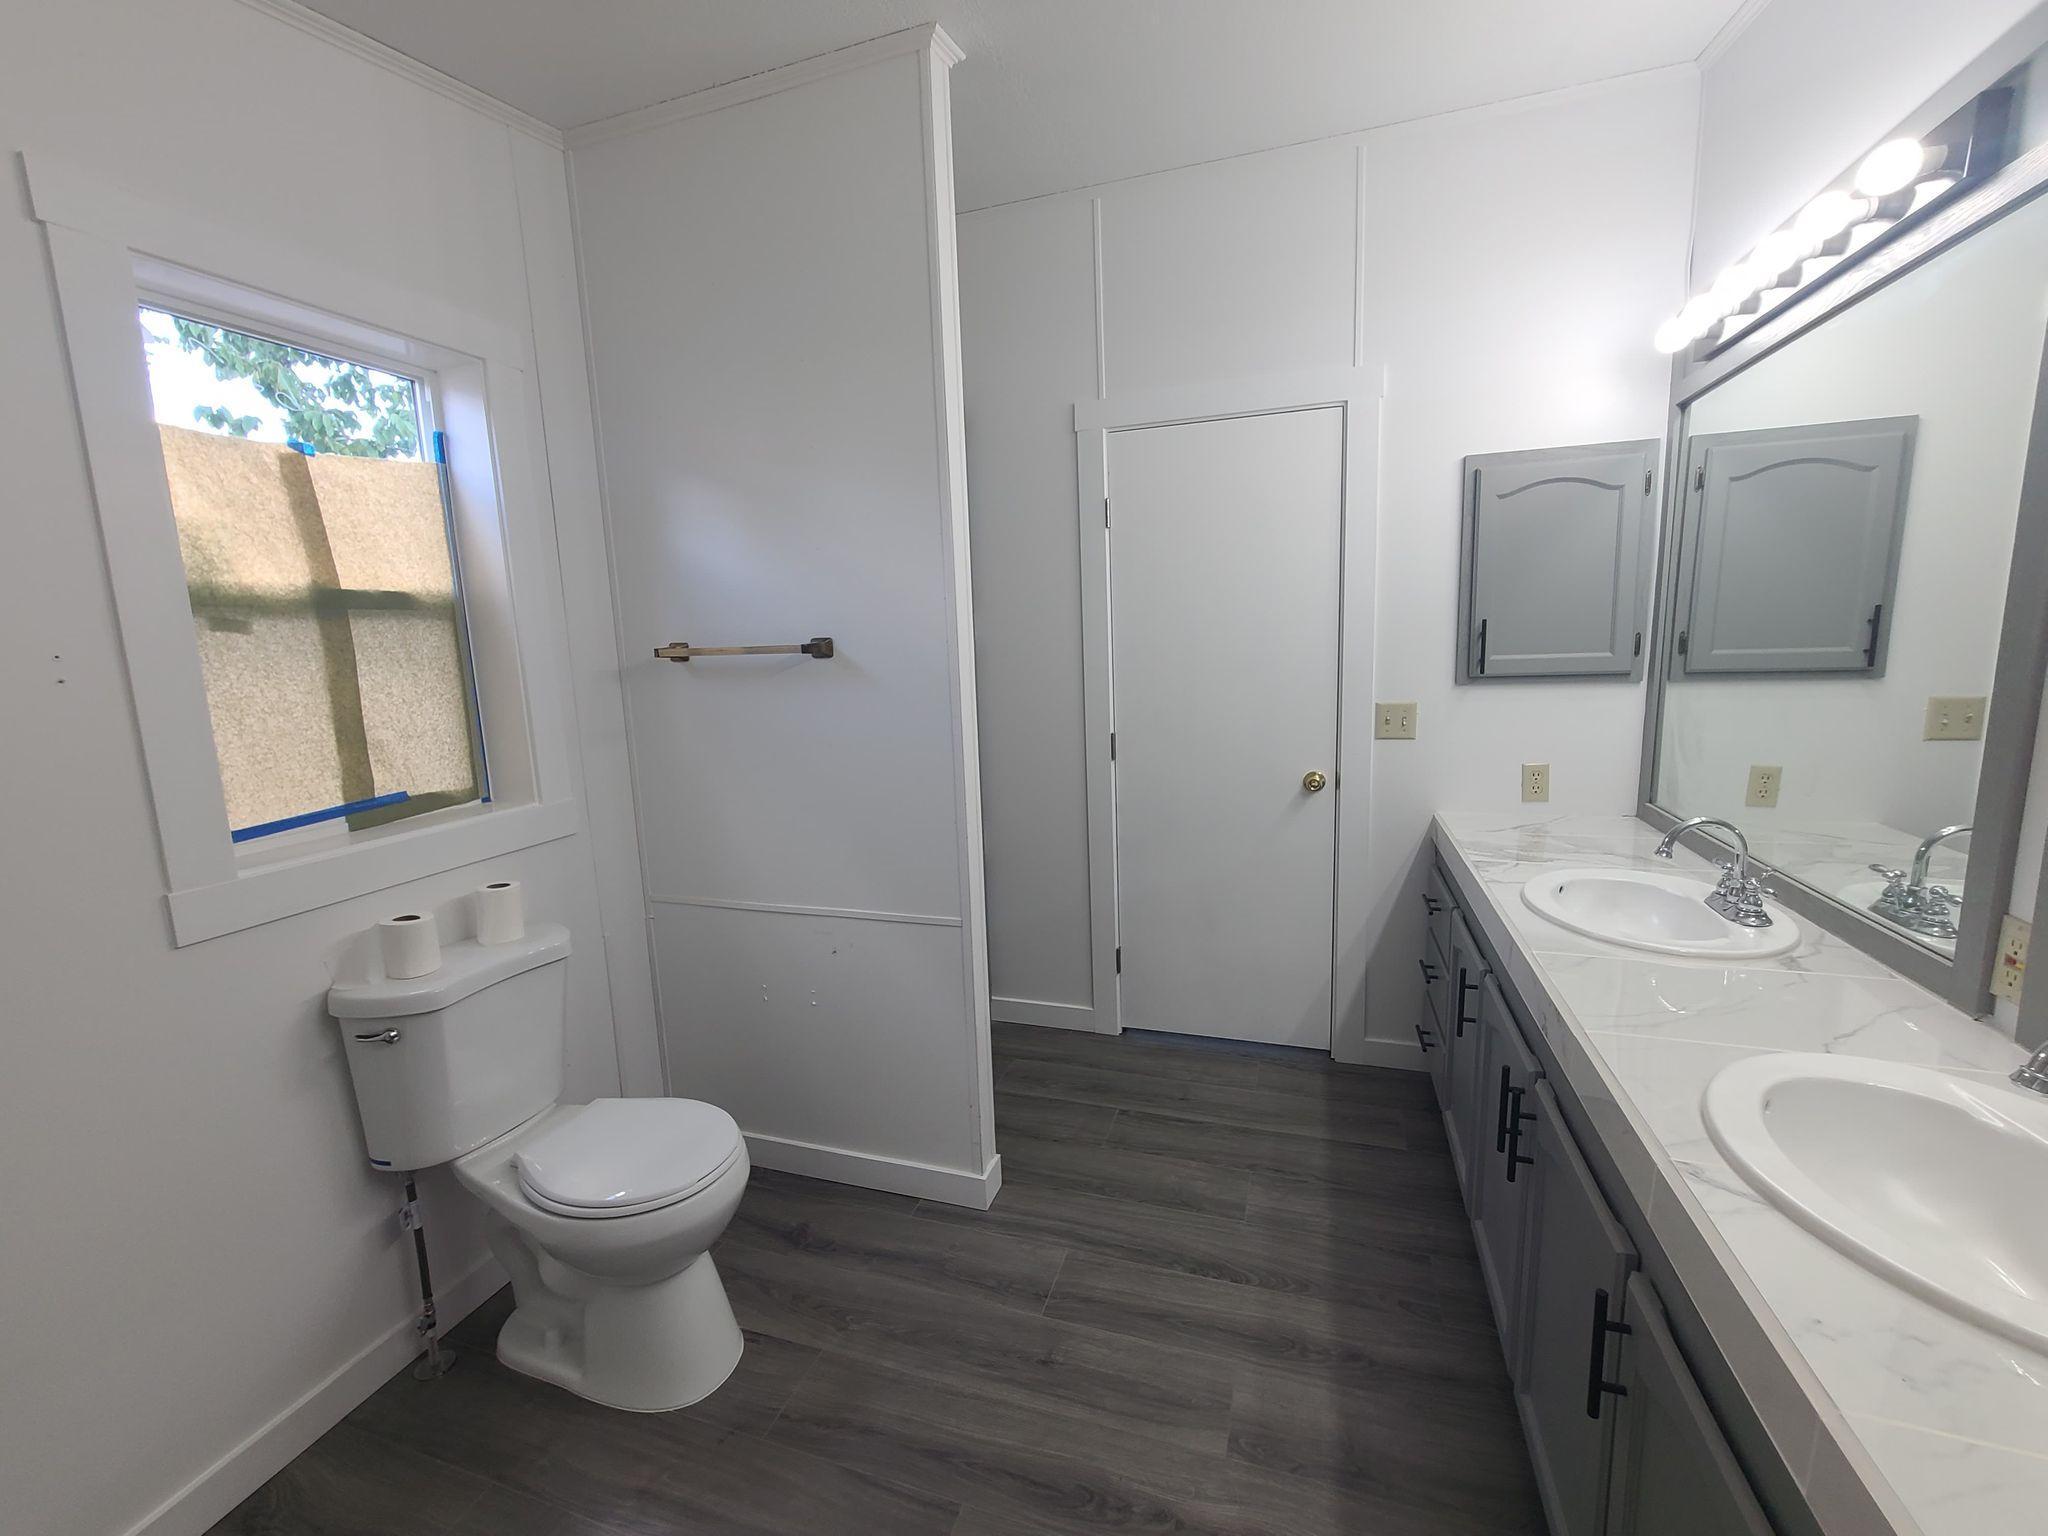 manufactured home in clackamas oregon